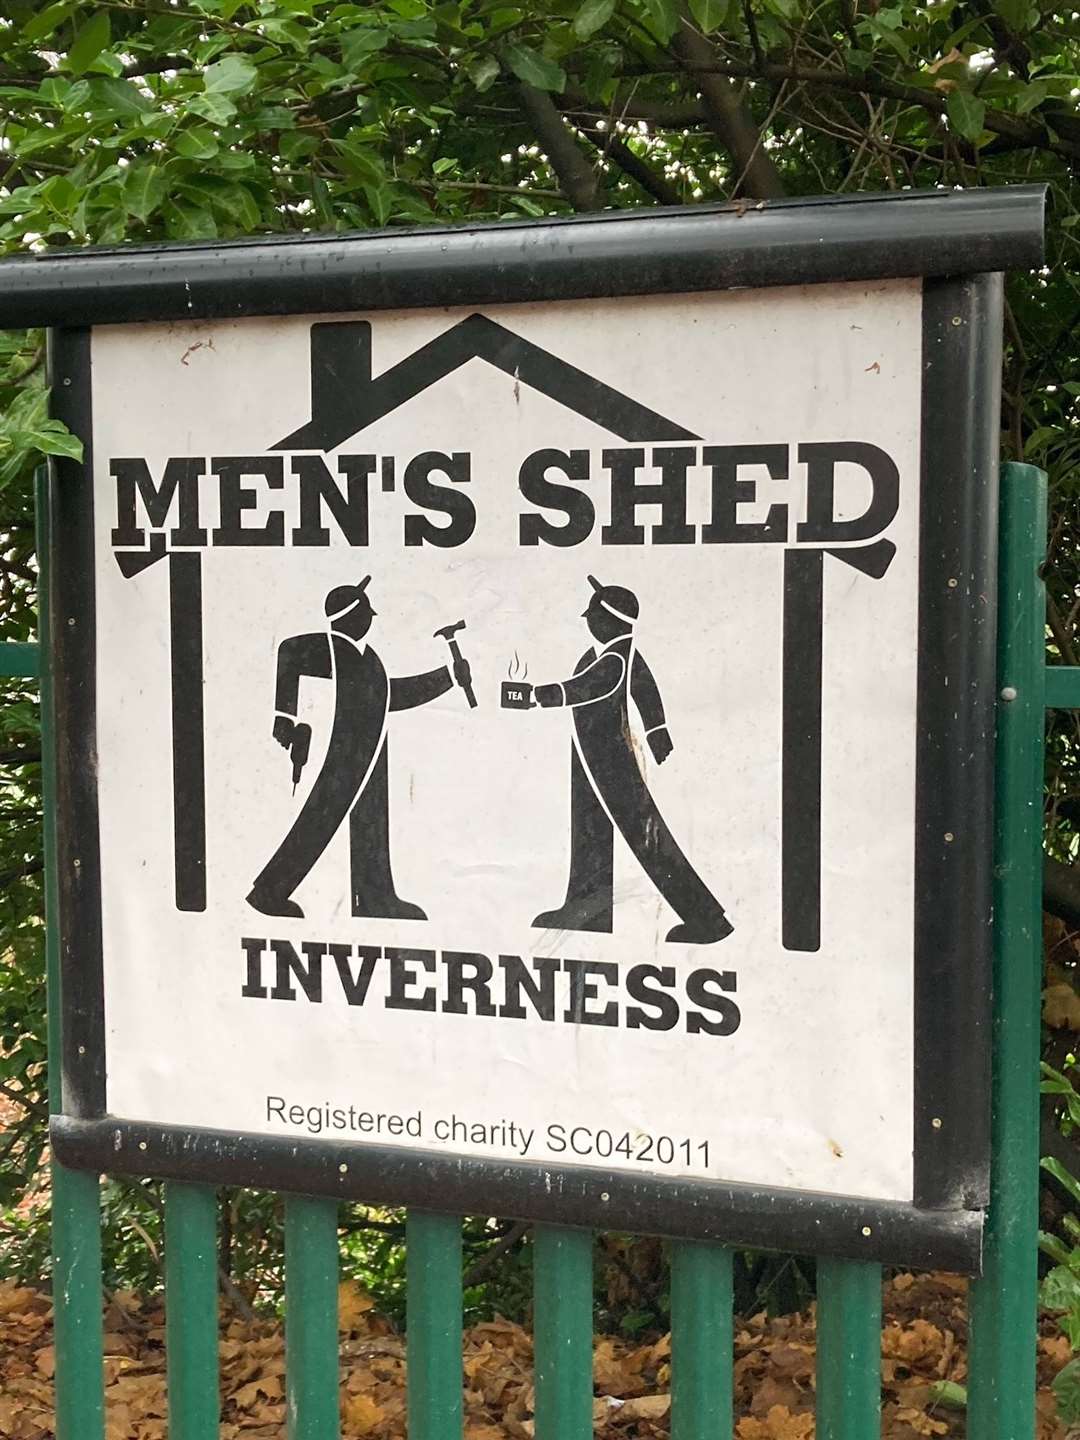 Men's Shed in Inverness.